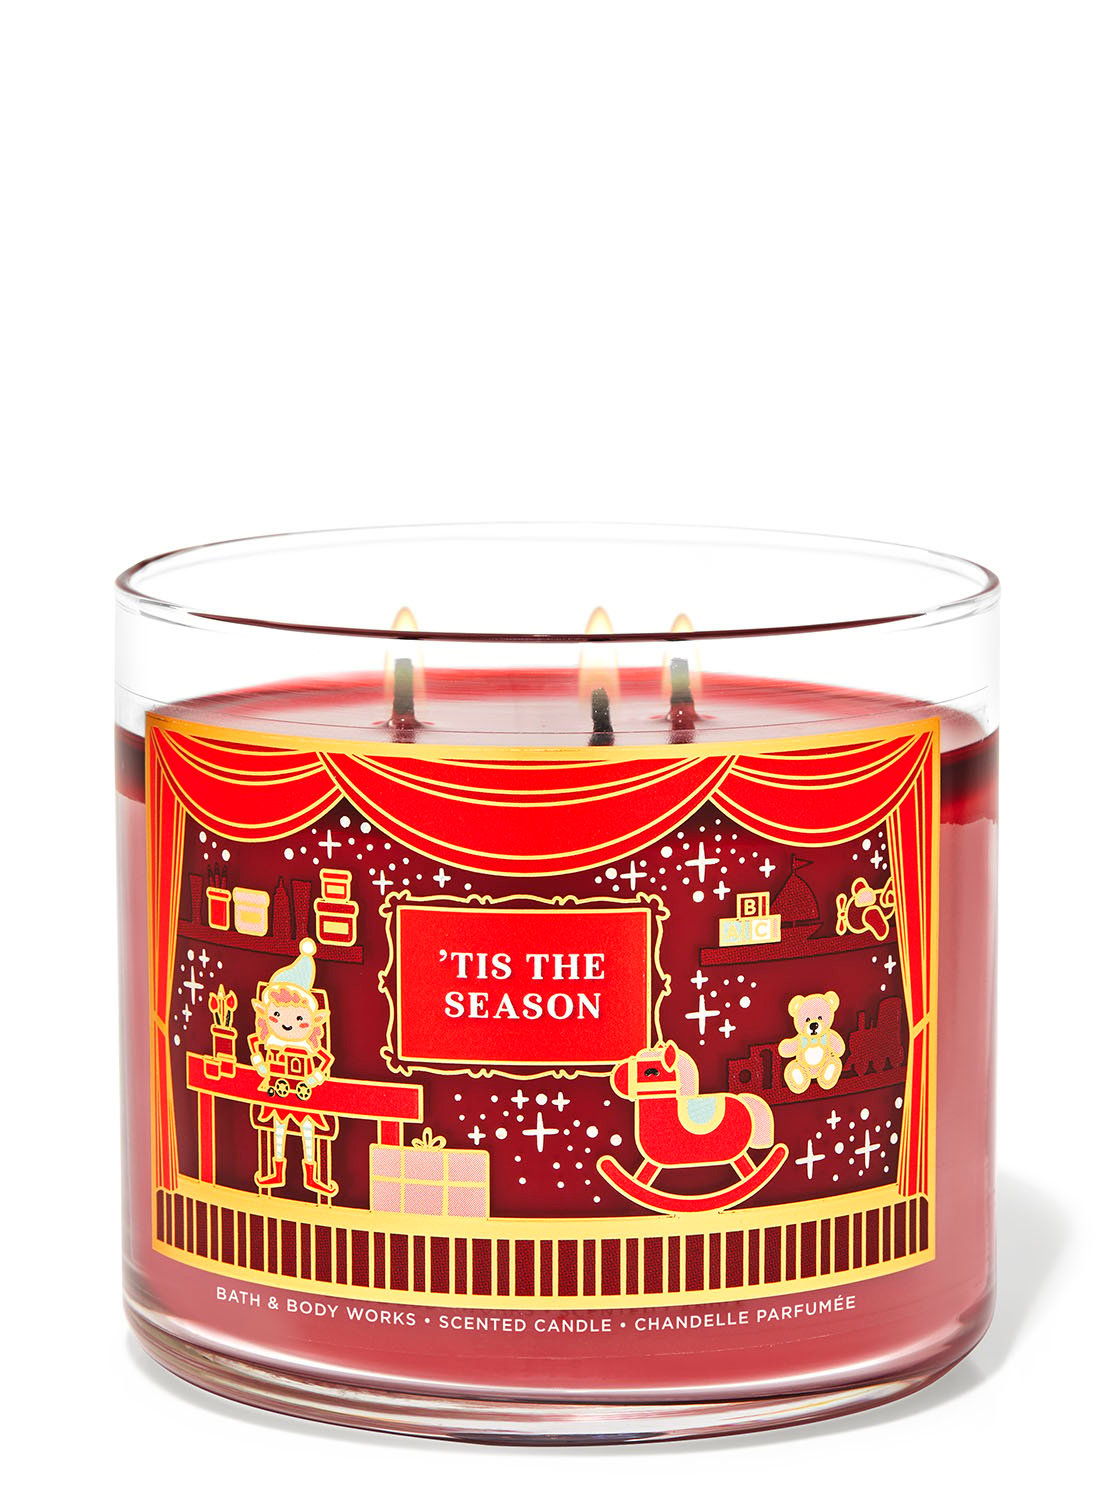 Tis the Season 3-Wick Candle | Bath and Body Works